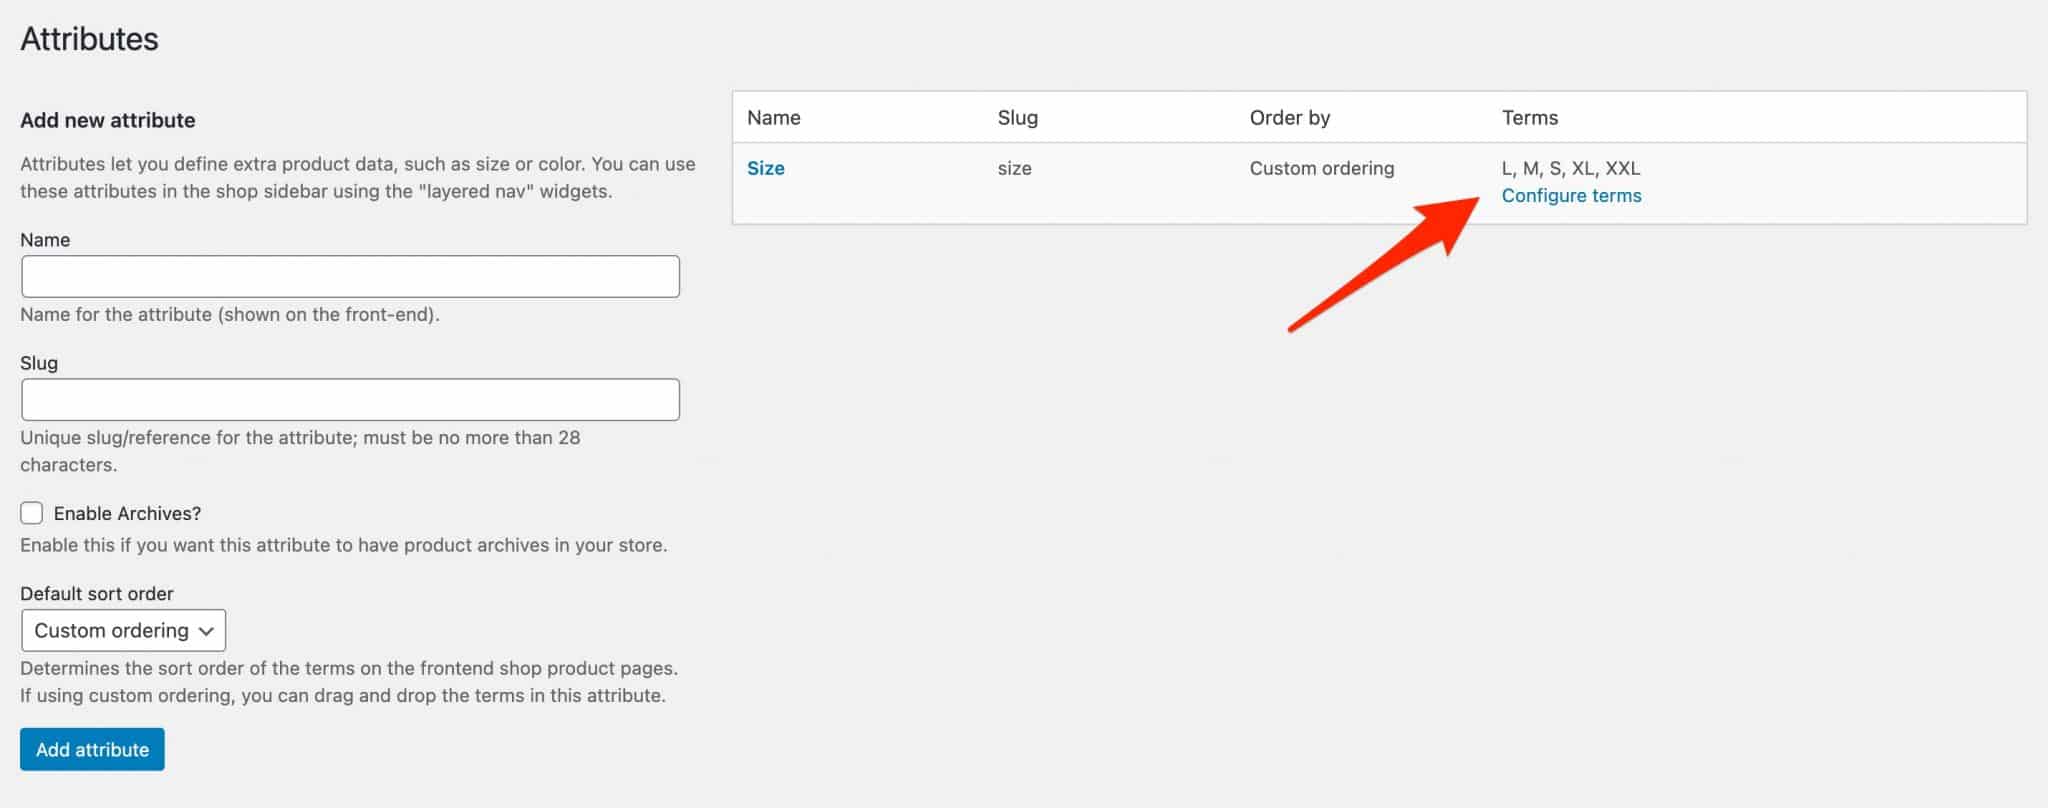 WooCommerce attributes example with the sizes L, M, S, XL, XXL.